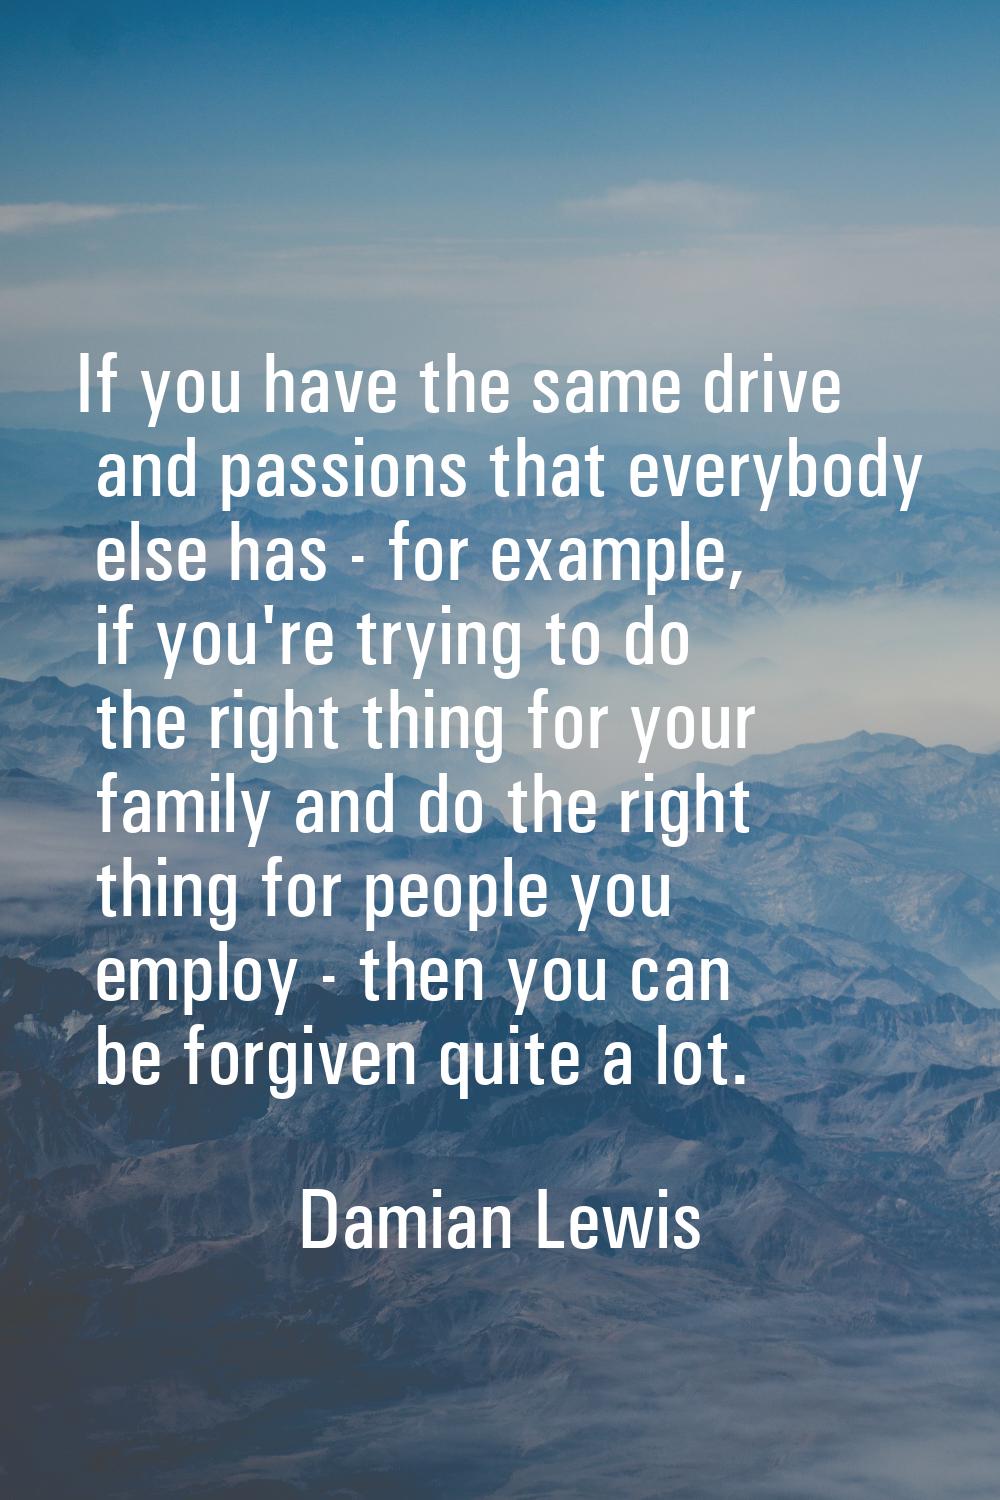 If you have the same drive and passions that everybody else has - for example, if you're trying to 